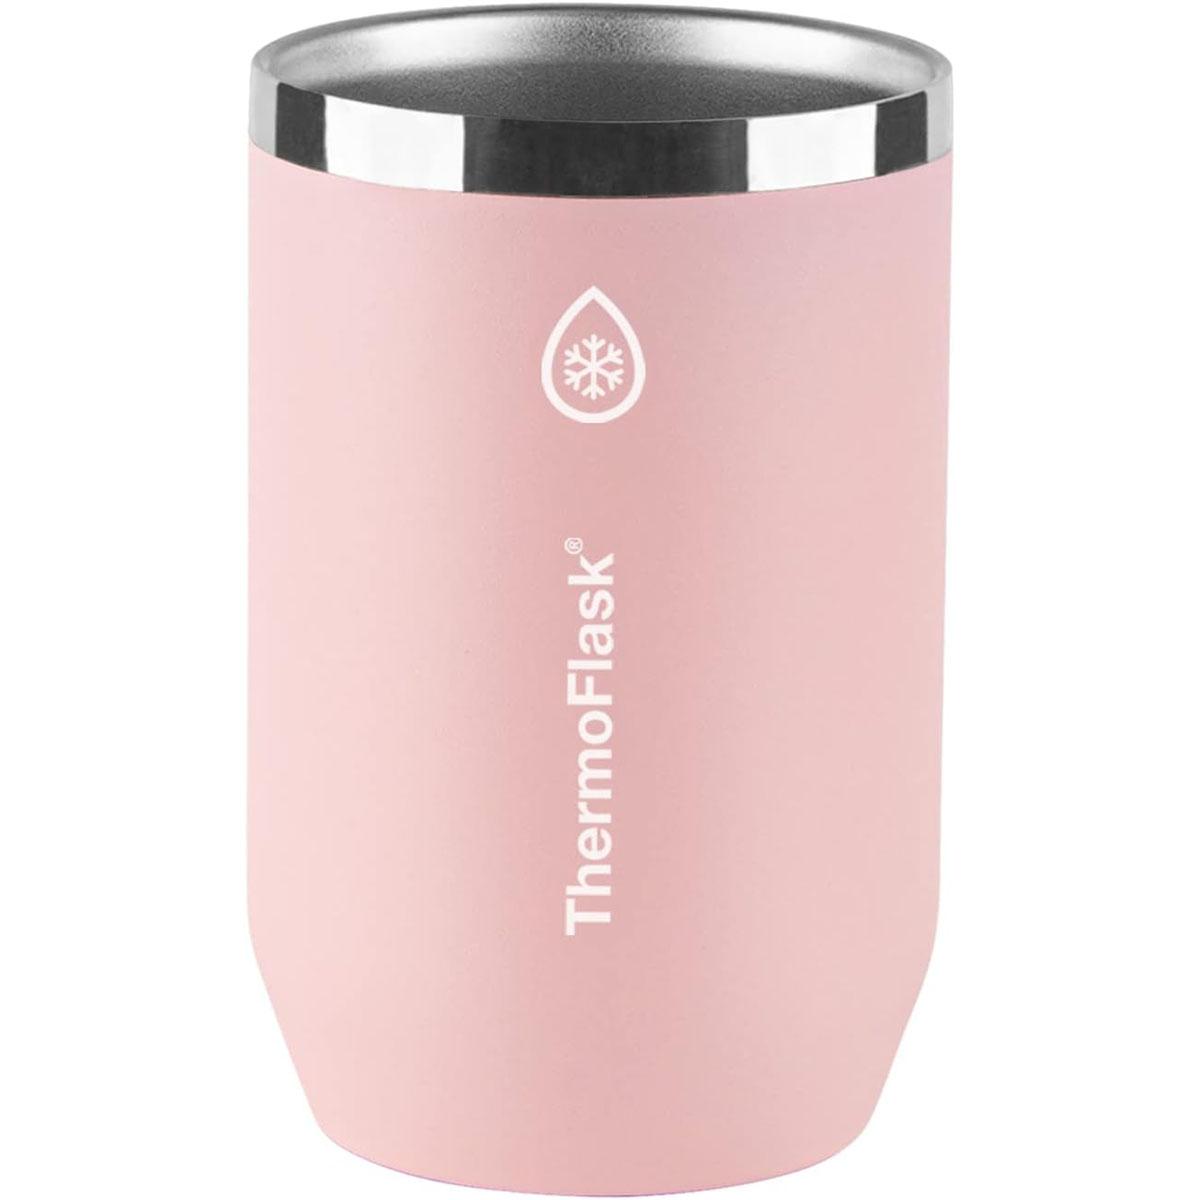 ThermoFlask 2-in-1 Vacuum Insulated Can Cooler Cup for $10.64